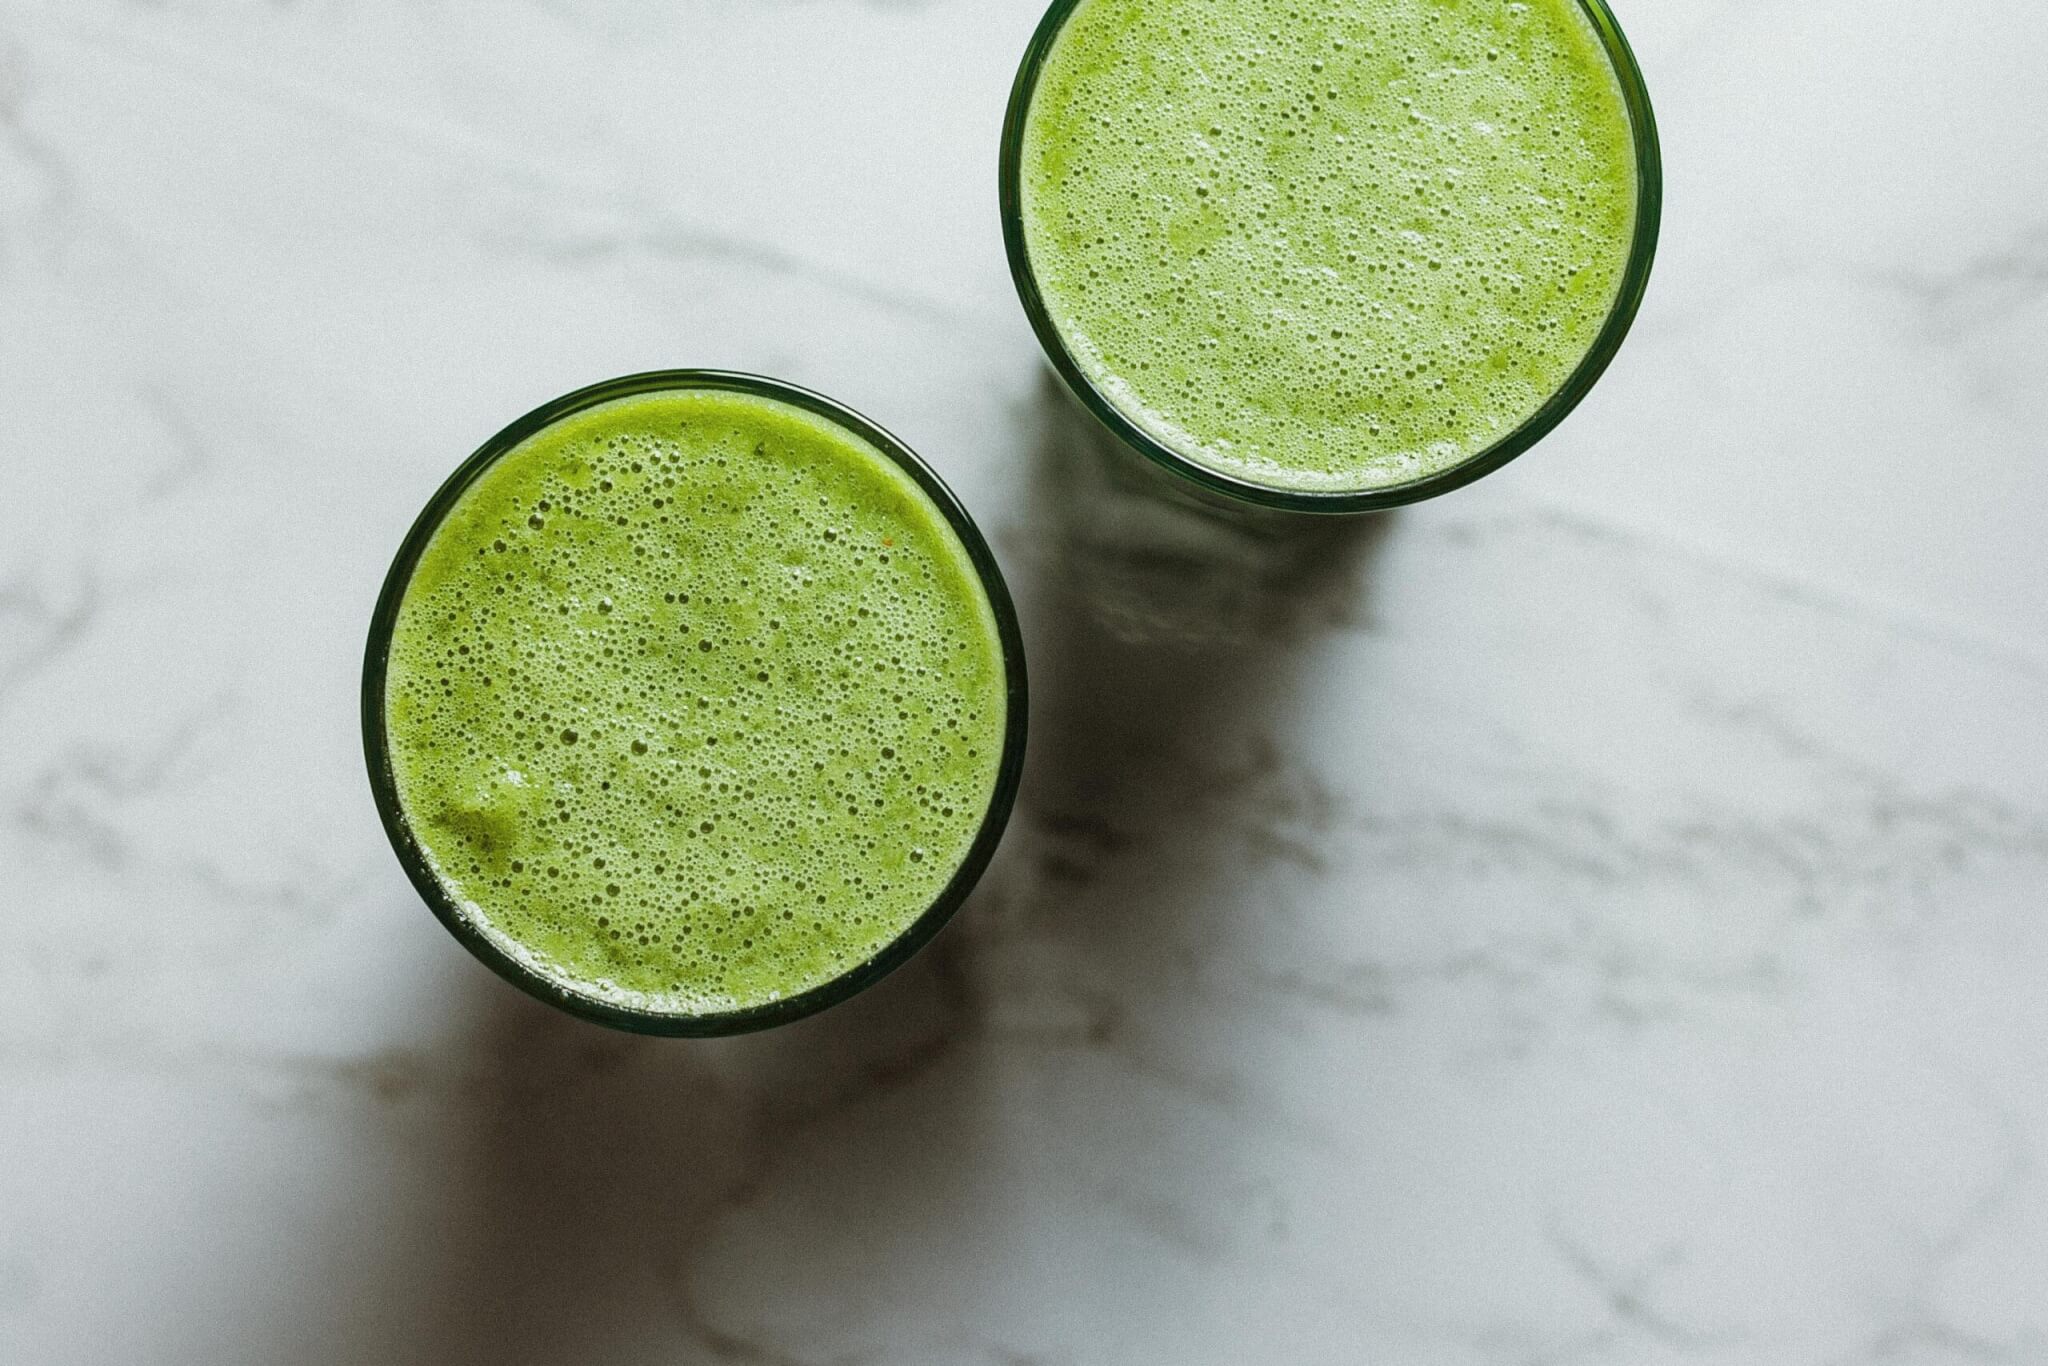 Green drinks in a glass